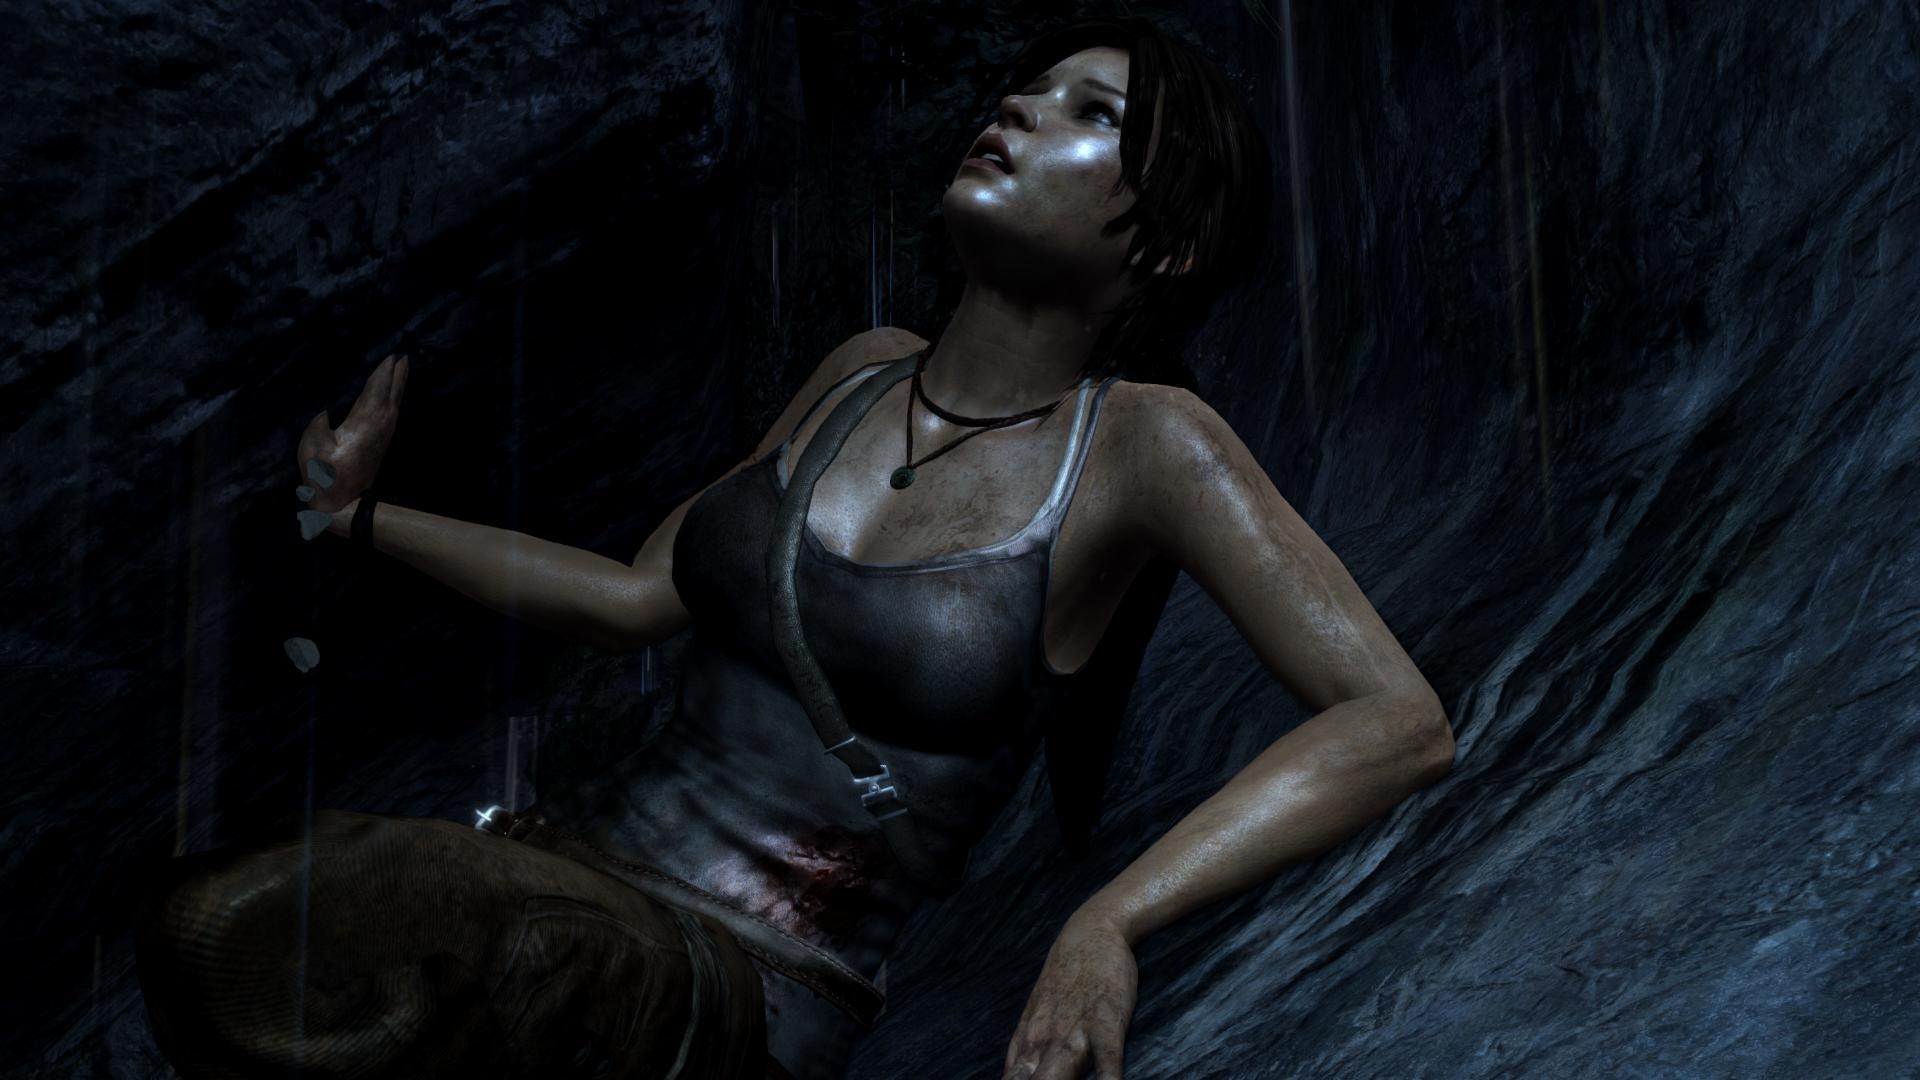 General 1920x1080 Tomb Raider video games necklace screen shot video game girls Lara Croft (Tomb Raider) PC gaming lipstick cave video game characters